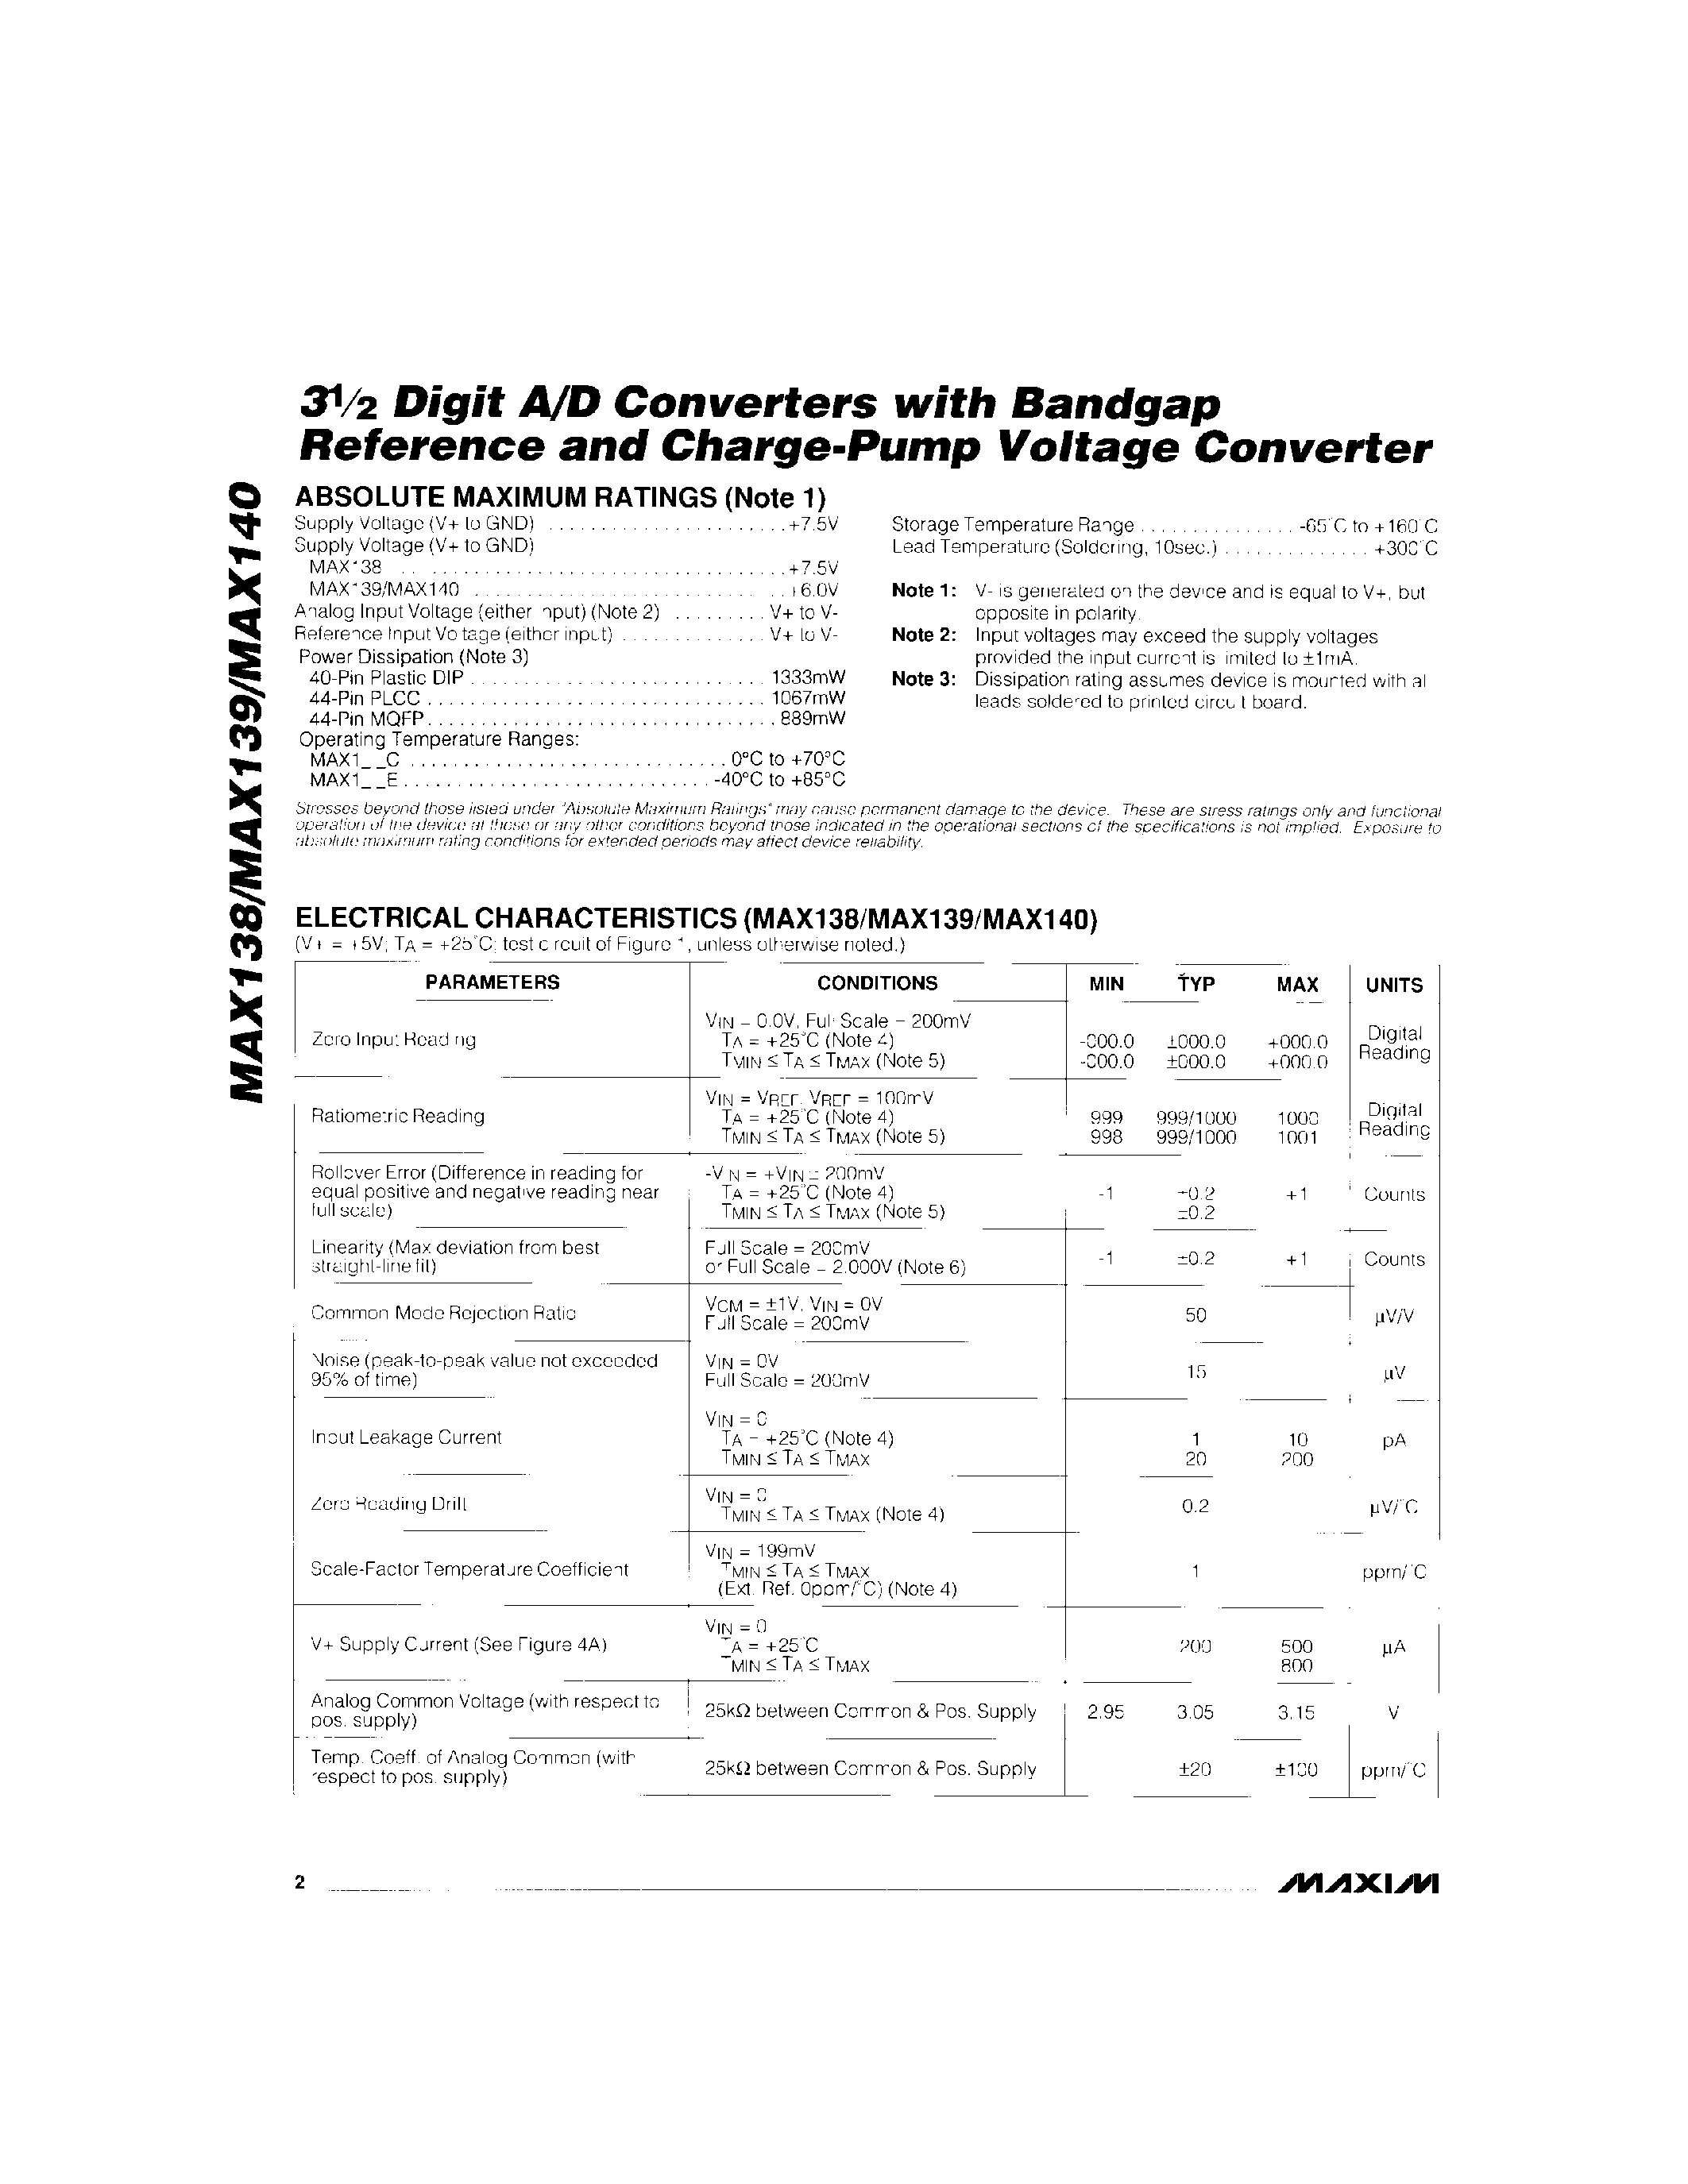 Datasheet MAX140C/D - 3Digit A/D Converters with Bandgap Refrence and Charge-Pump Voltage Converter page 2